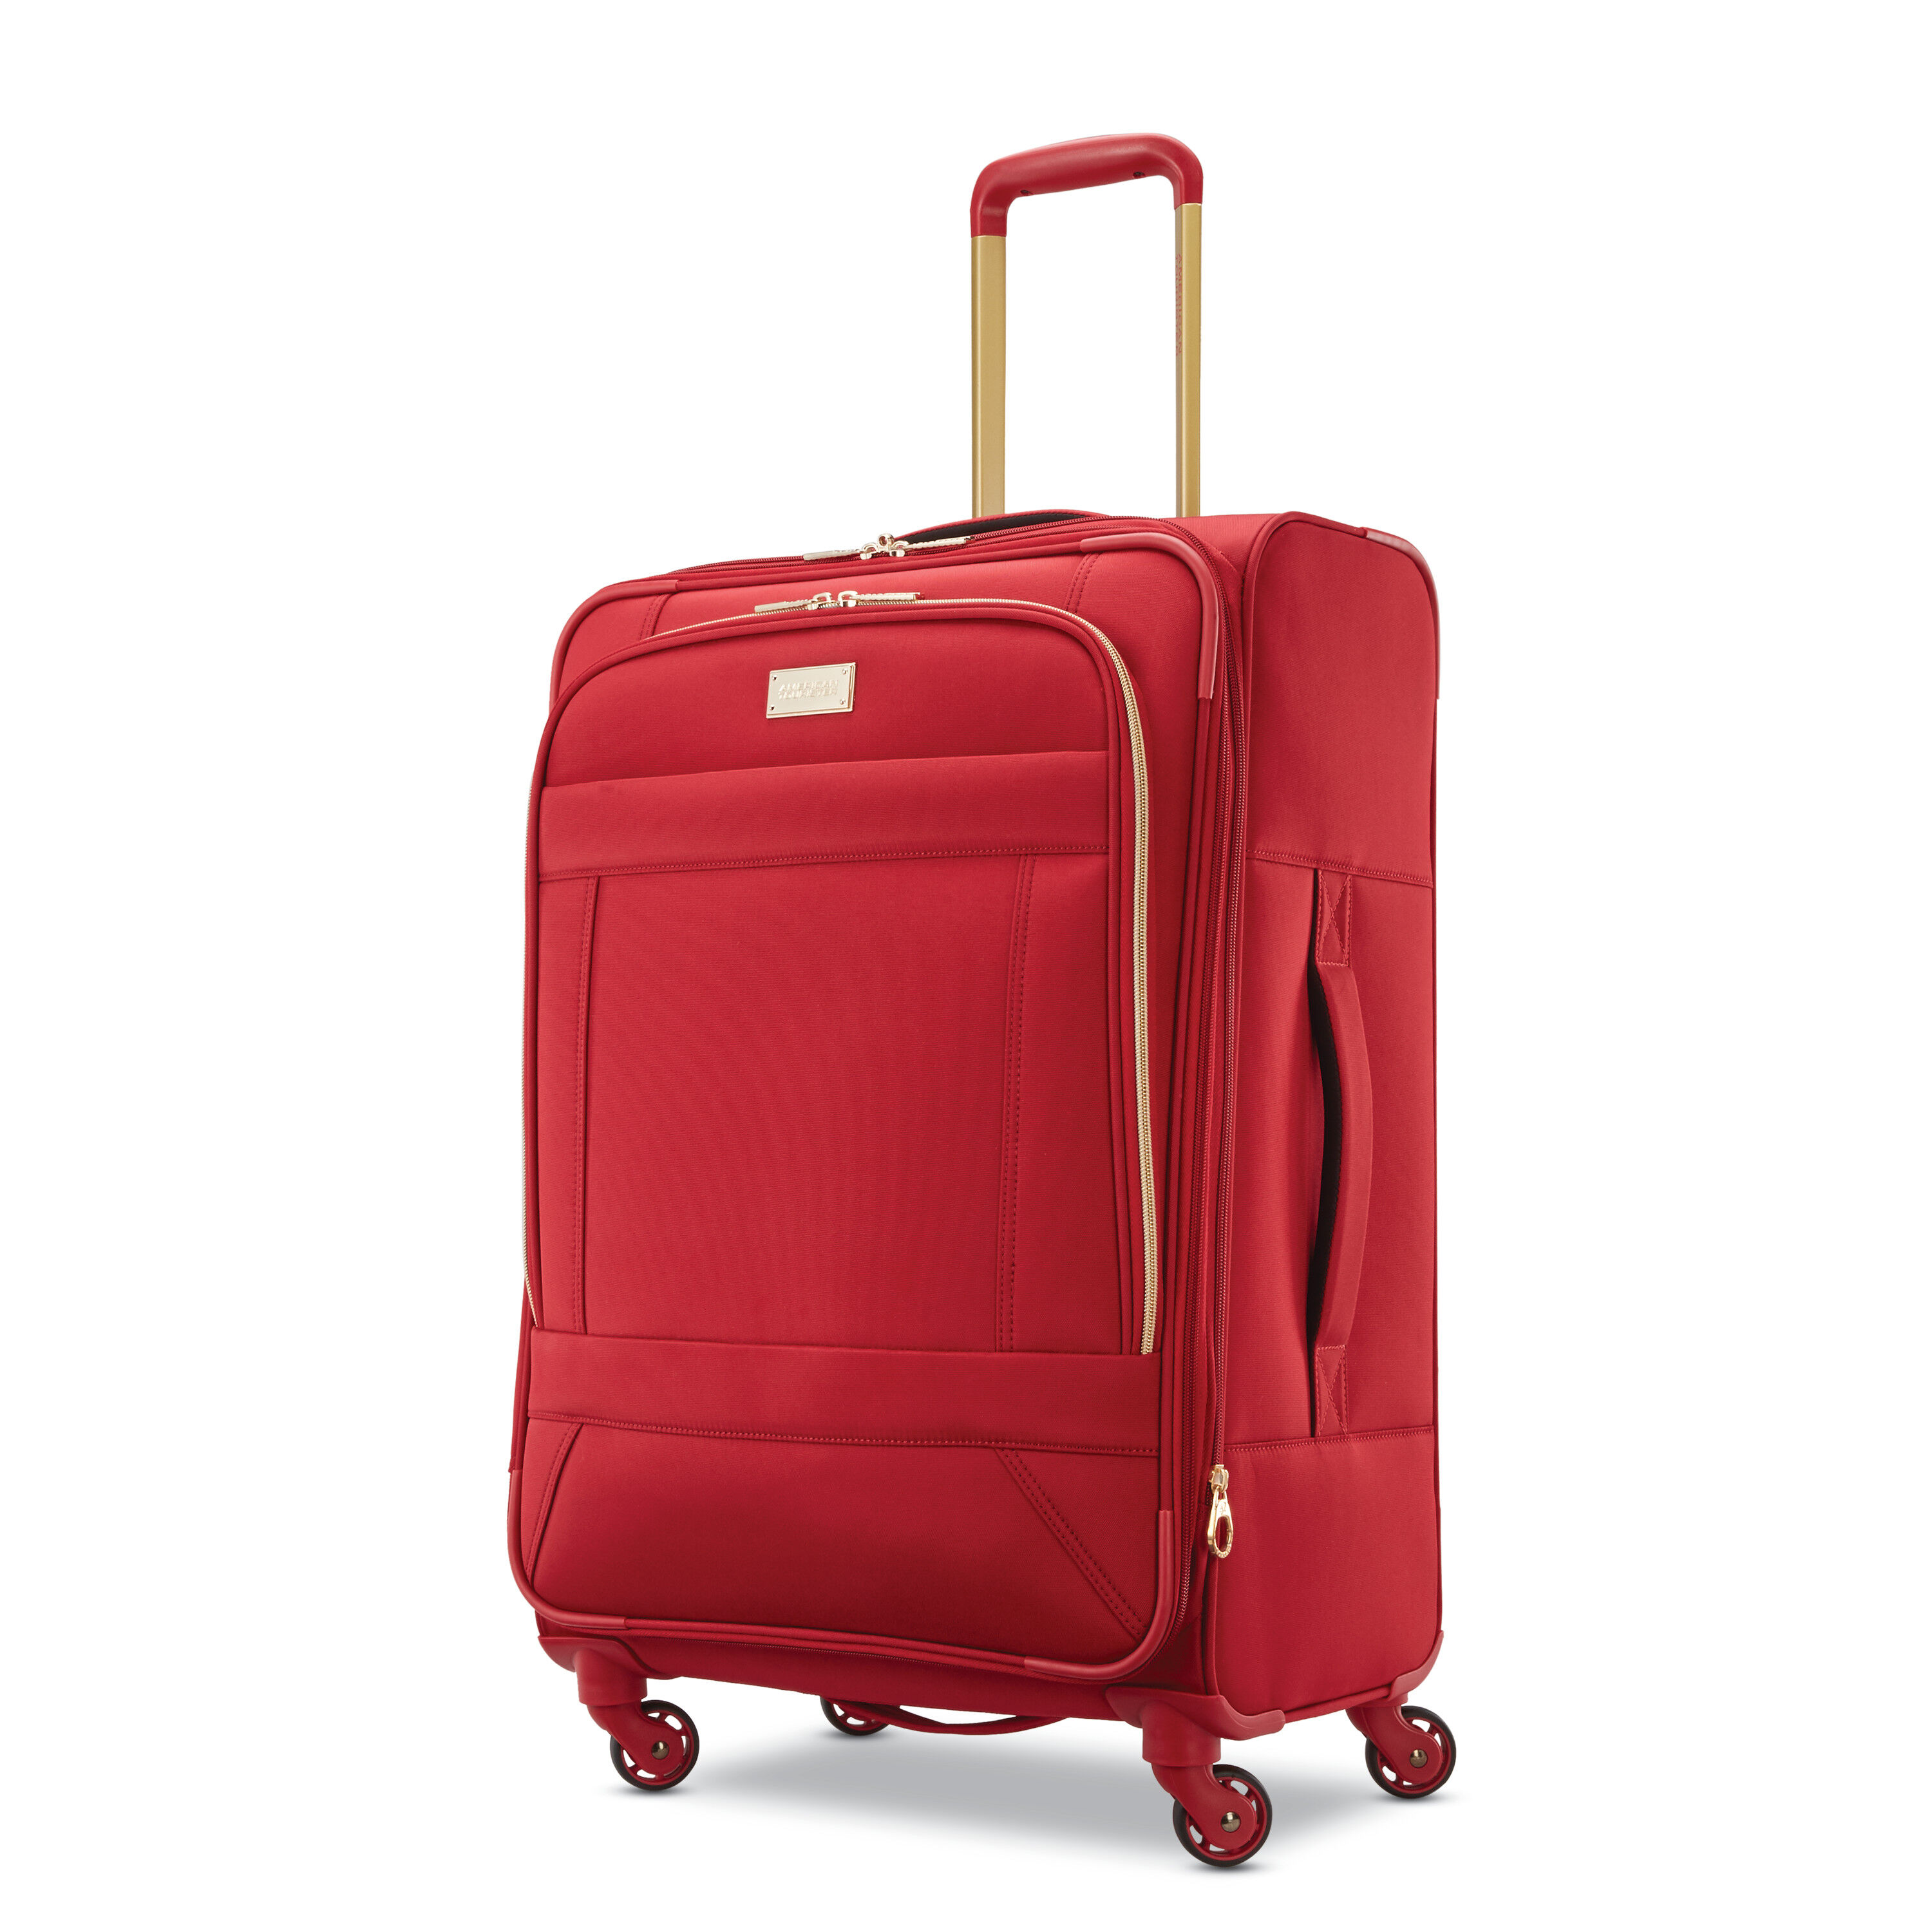 Kamiliant by American Tourister Vento 52cm Red Wheel Duffle Trolley Bag FT7  0 00 001  Sunrise Trading Co